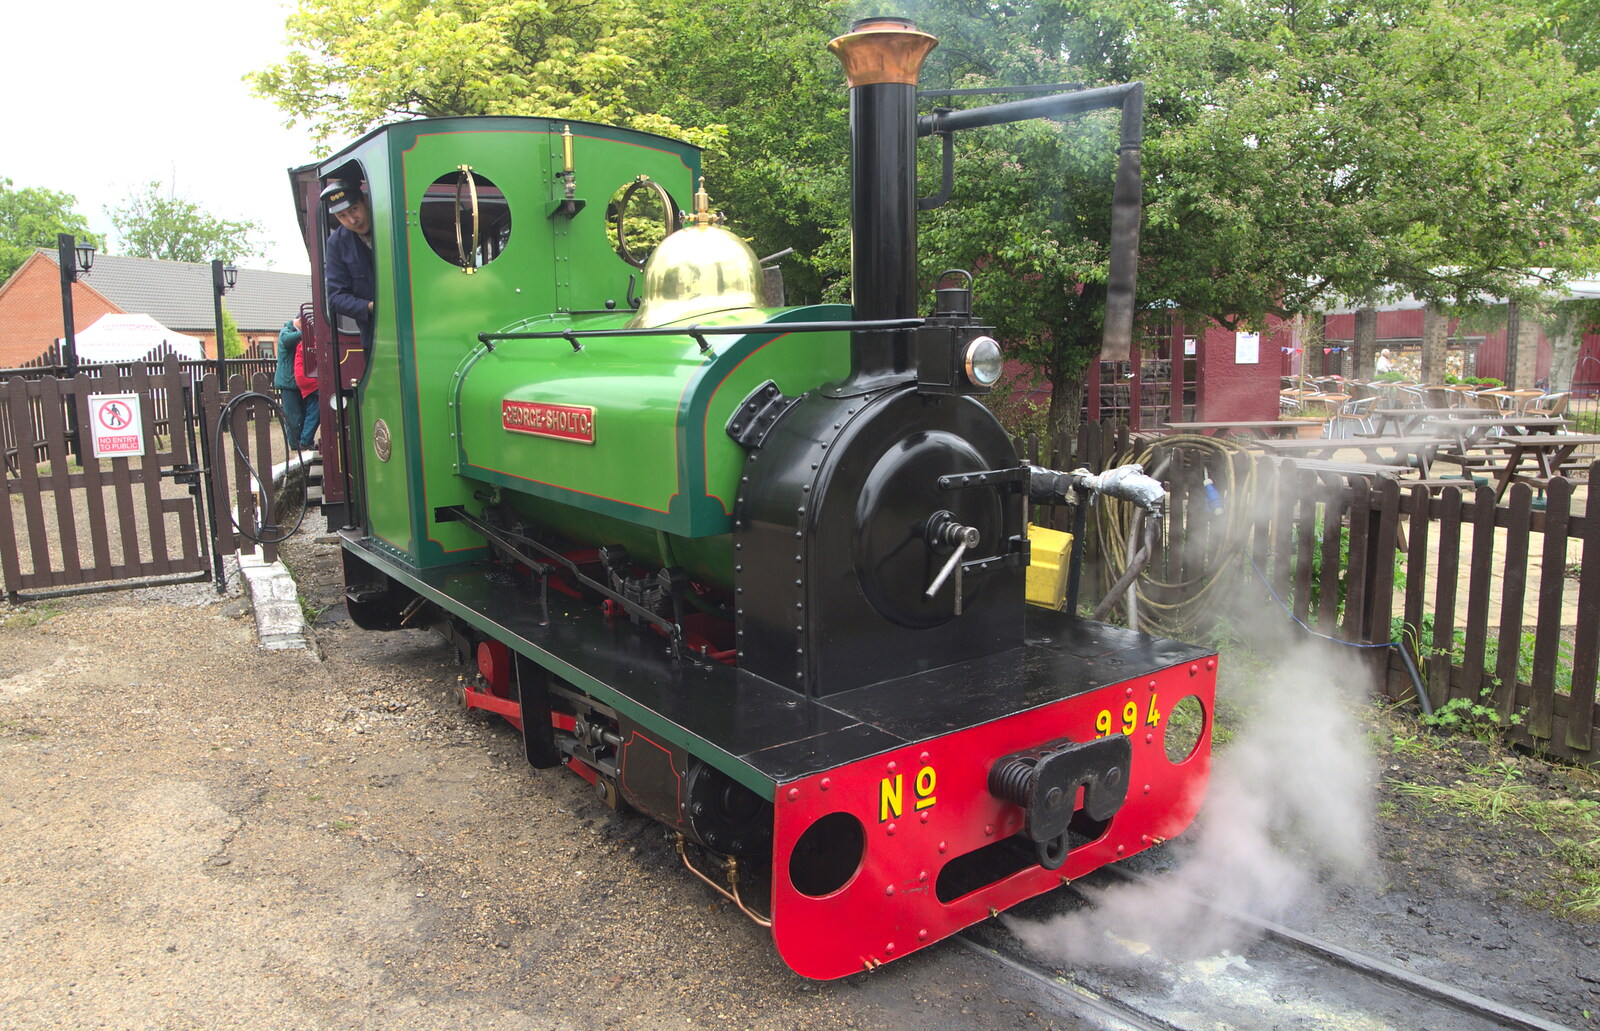 The George Sholto is steamed up from A Day at Bressingham Steam and Gardens, Diss, Norfolk - 18th May 2013